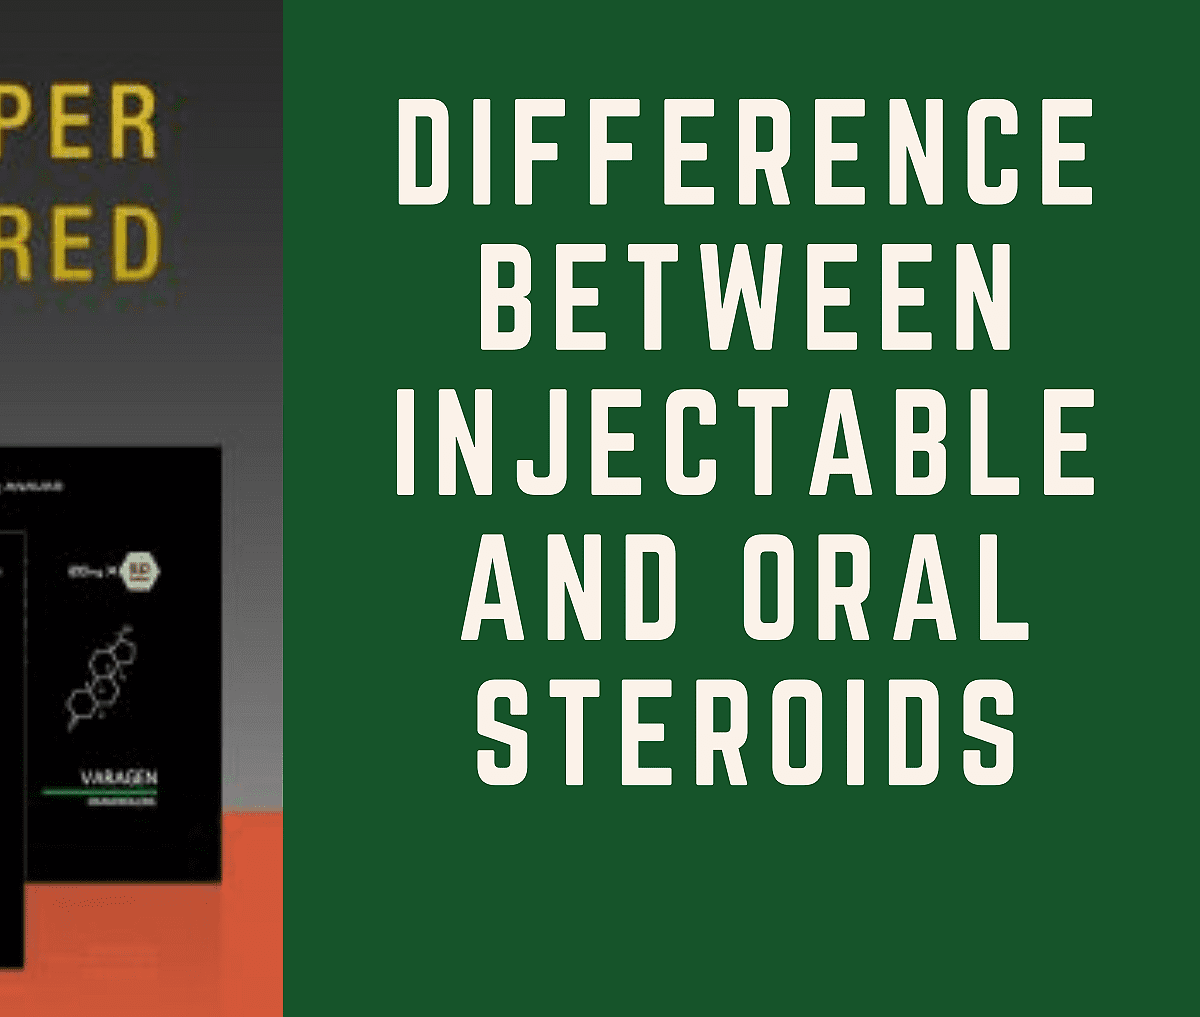 Difference Between Injectable and Oral Steroids